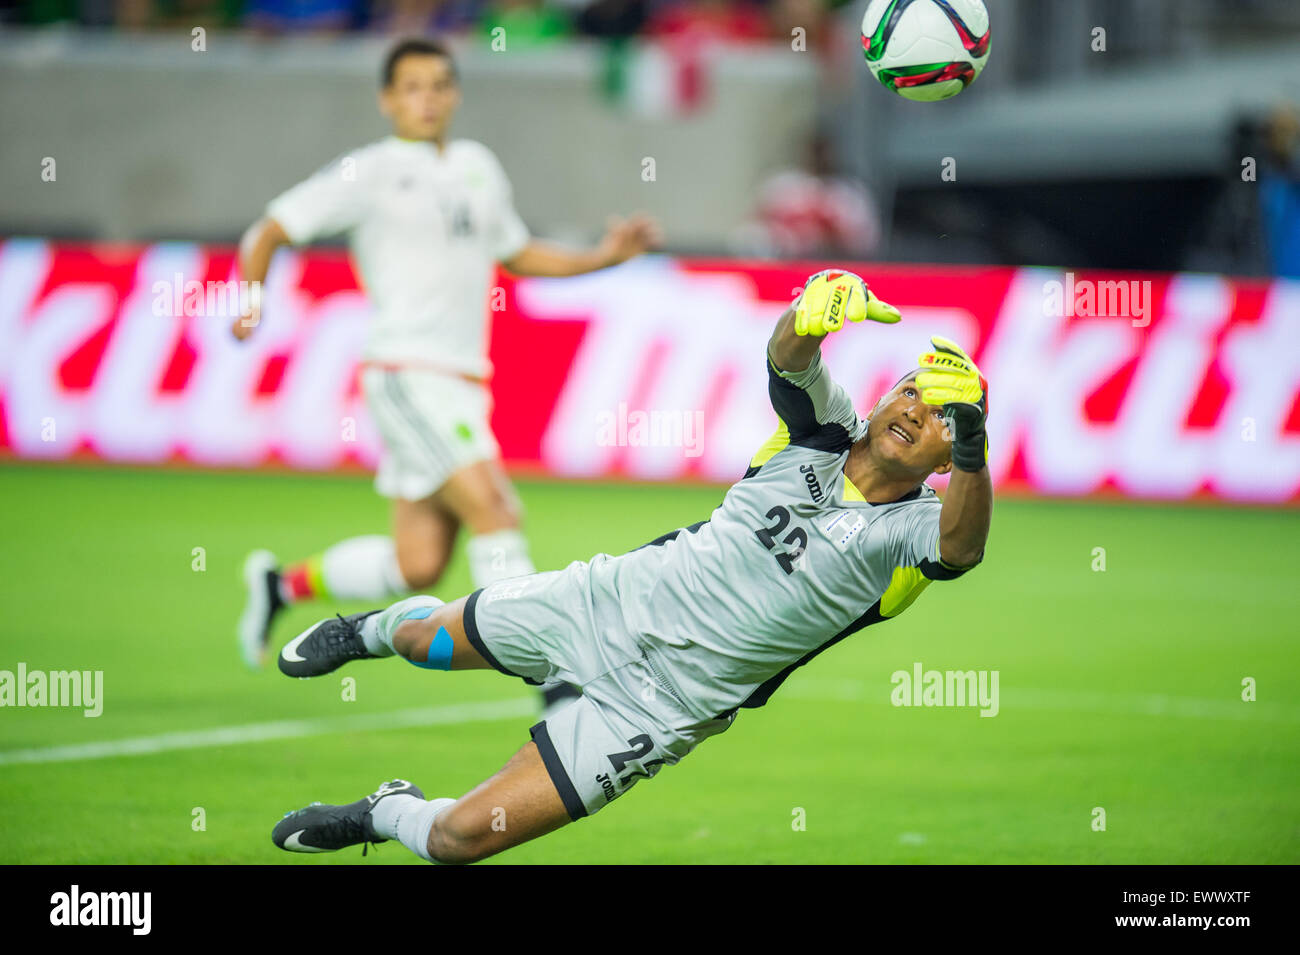 Houston, TX, USA. 1st July, 2015. Honduras goalkeeper Donis Escober (22) makes a save during the 1st half of an international soccer match between Honduras and Mexico at NRG Stadium in Houston, TX. Trask Smith/CSM/Alamy Live News Stock Photo